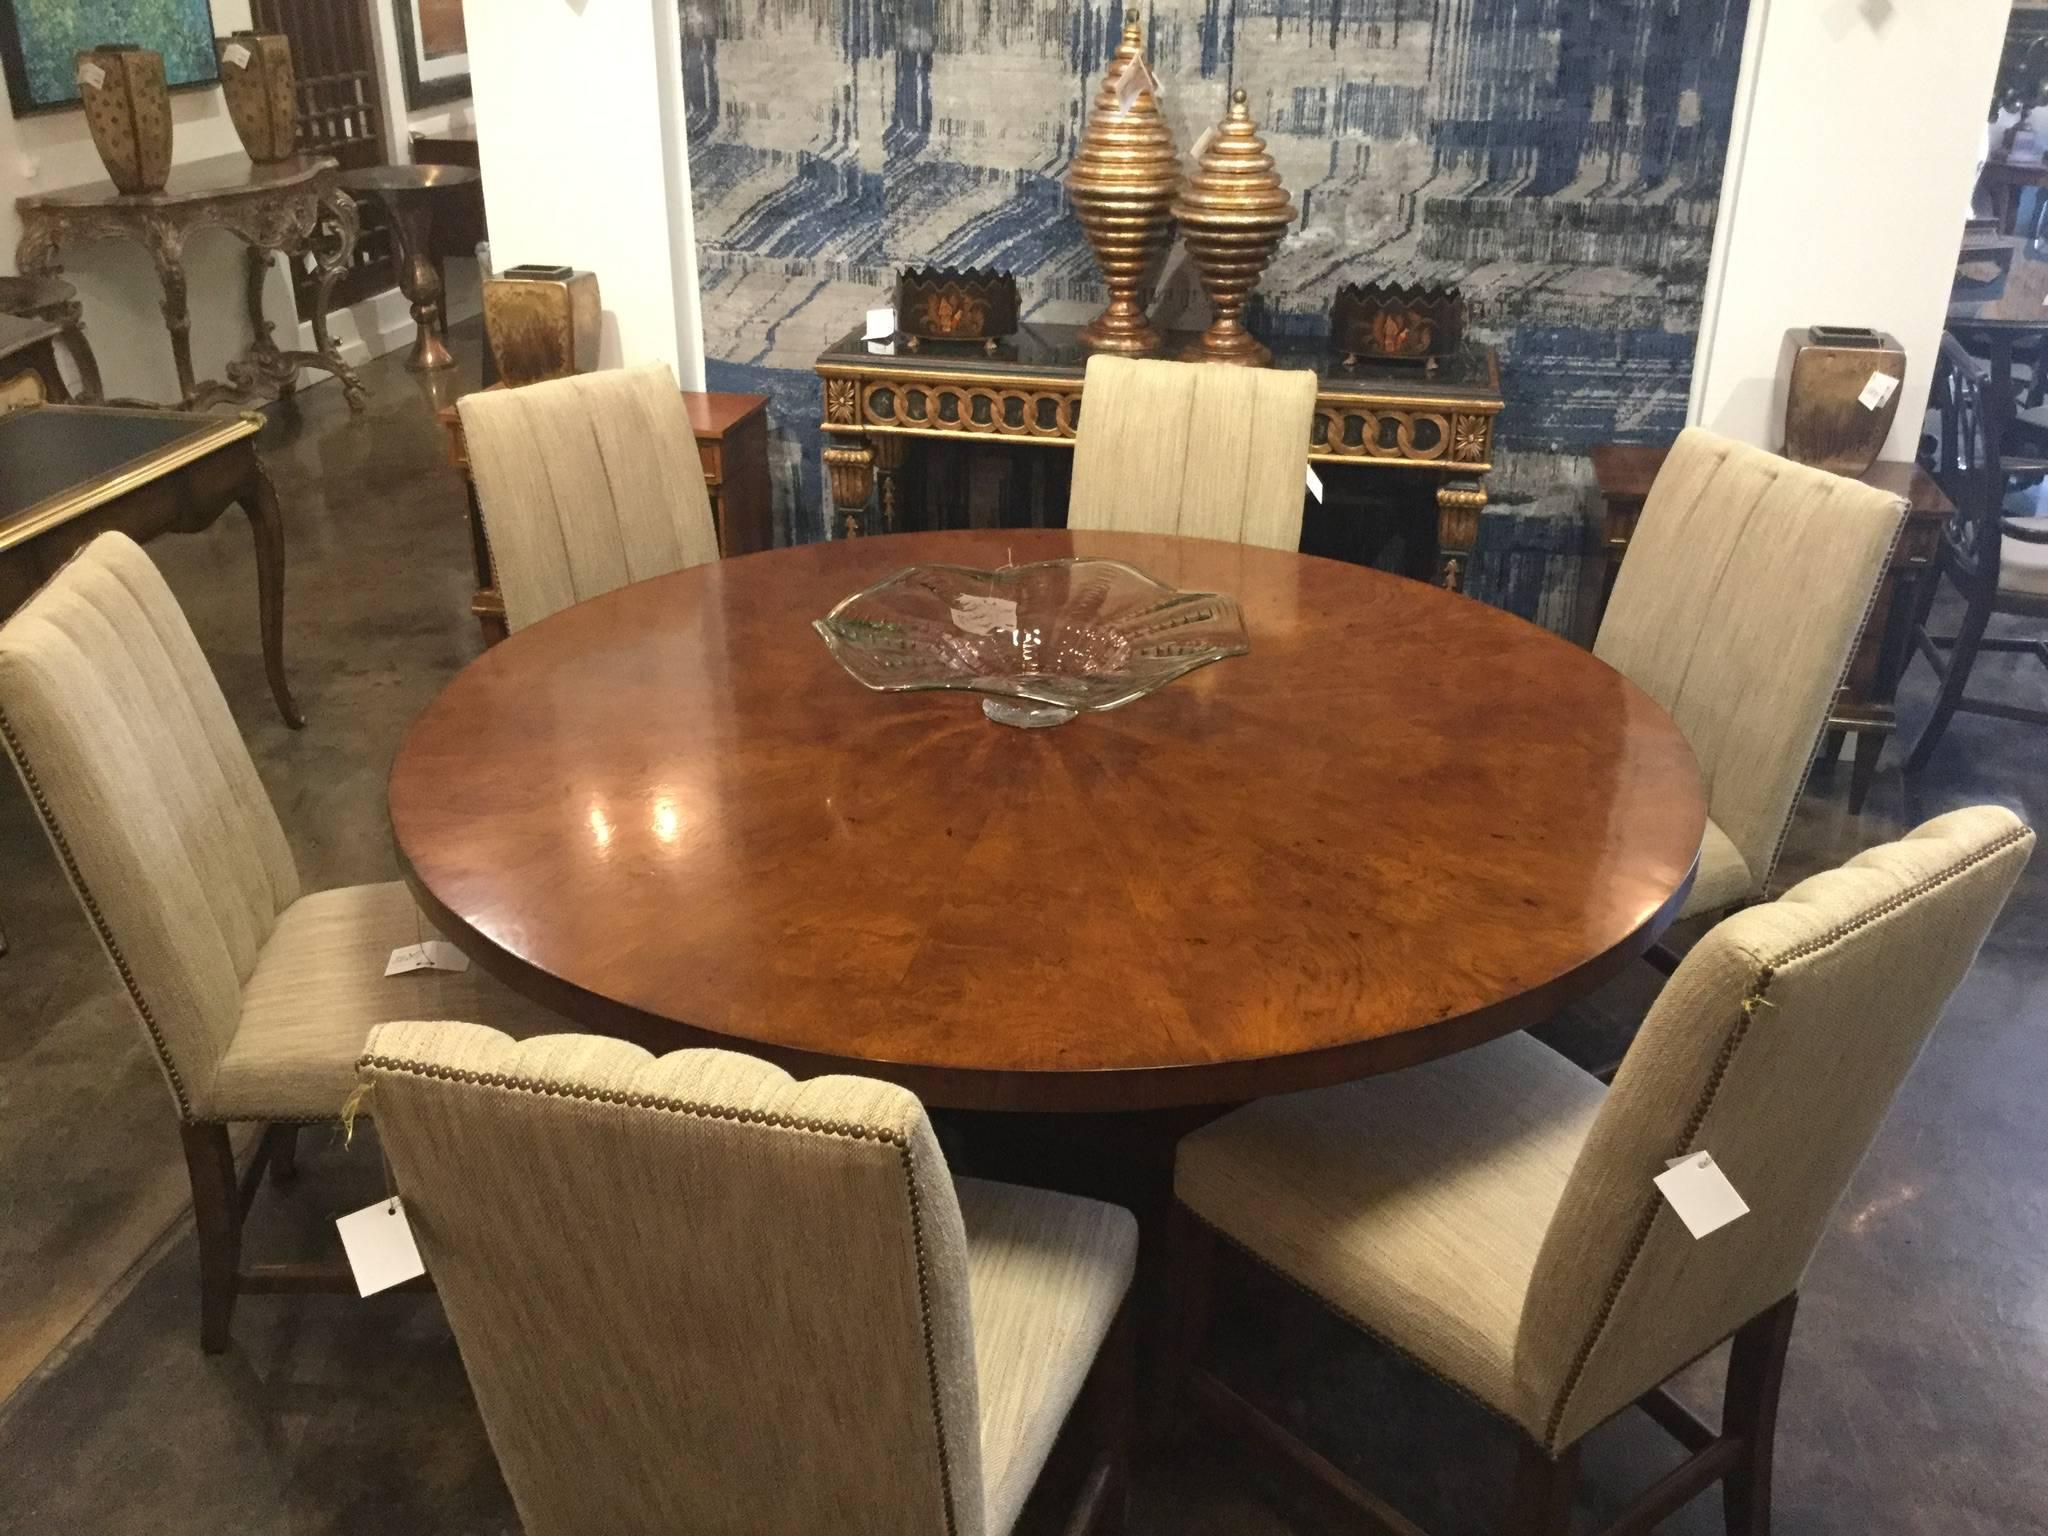 Classic dining table featuring Italian burl walnut veneered pie shaped top with Art Deco style base. Handcrafted artisan design featuring a slight distressed finish, Italy.